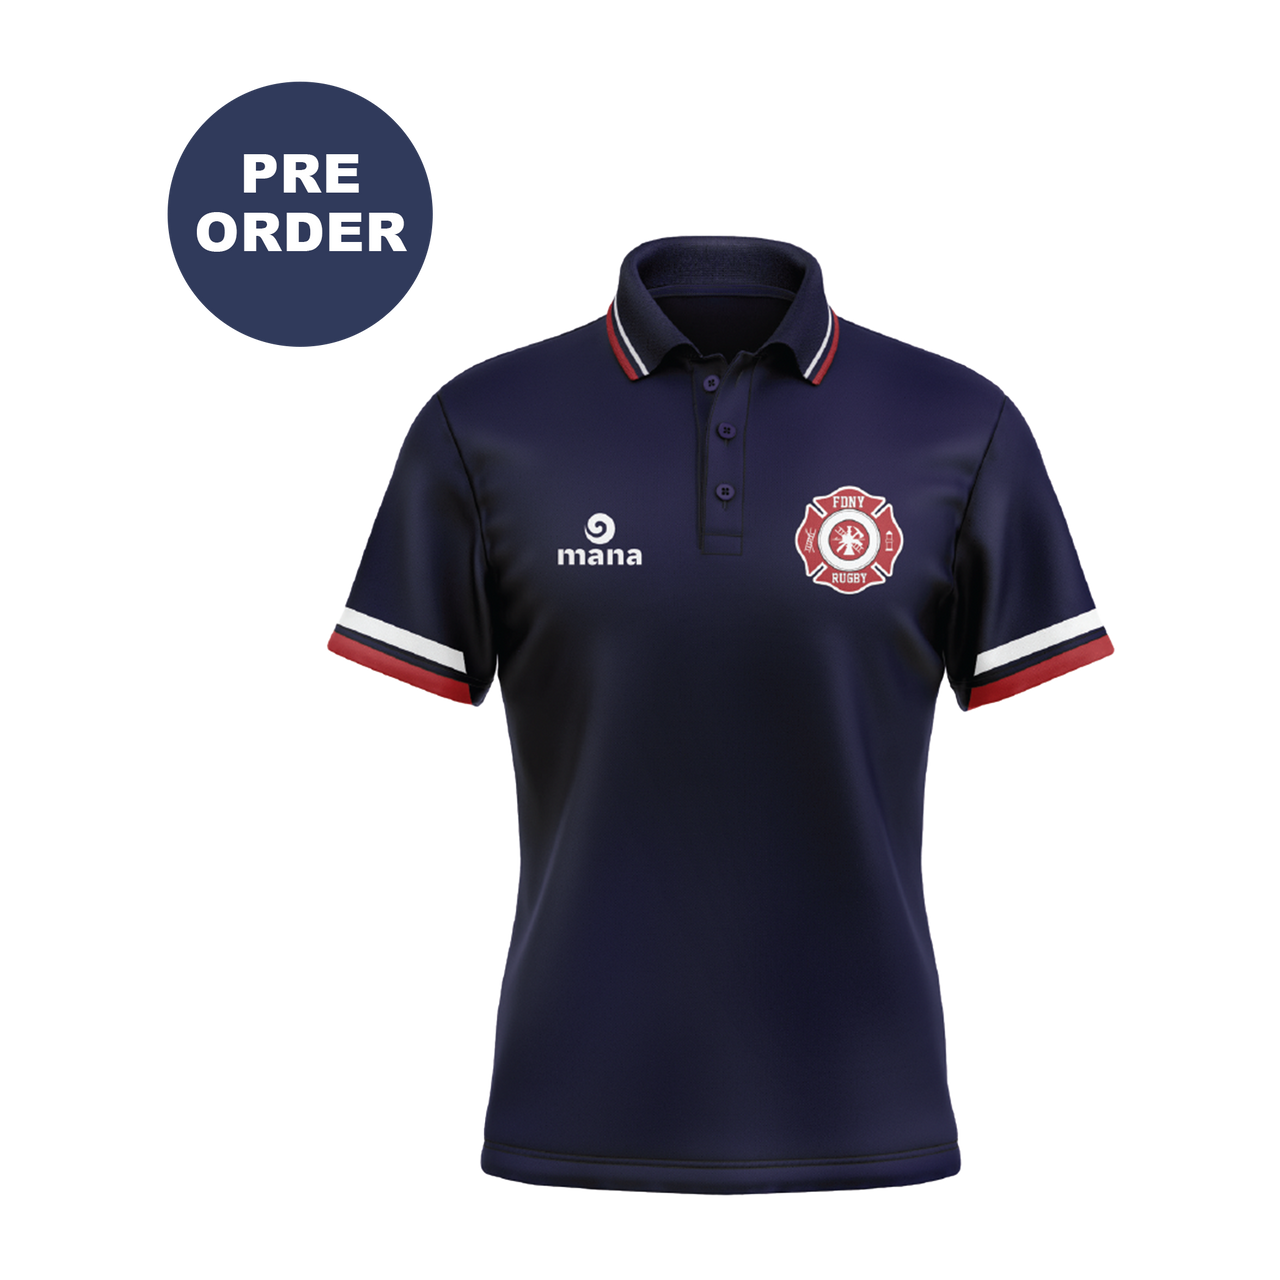 FDNY Rugby Polo Shirt